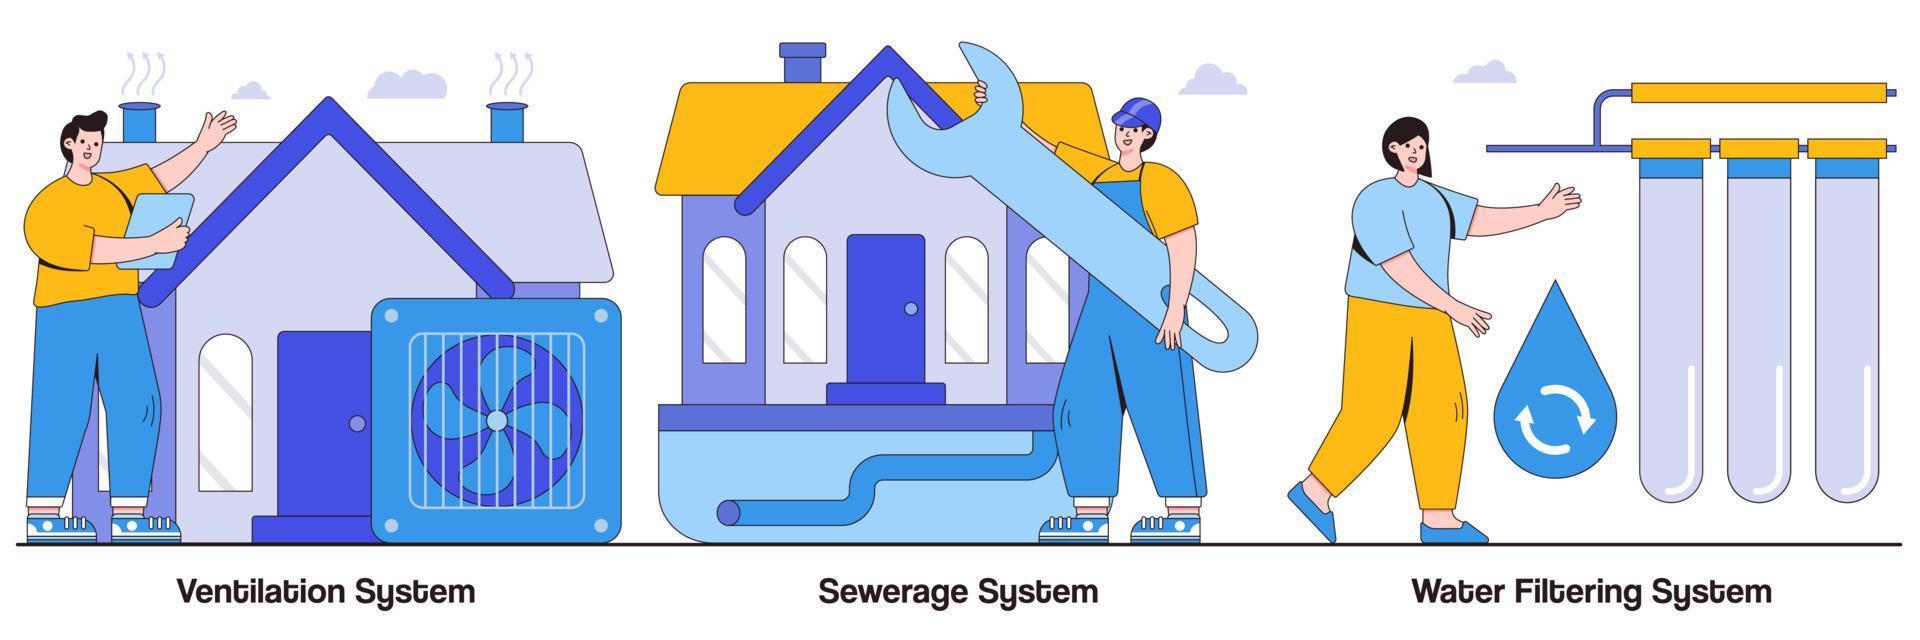 Ventilation, Sewerage and Water Filtering System with People Characters Illustrations Pack vector